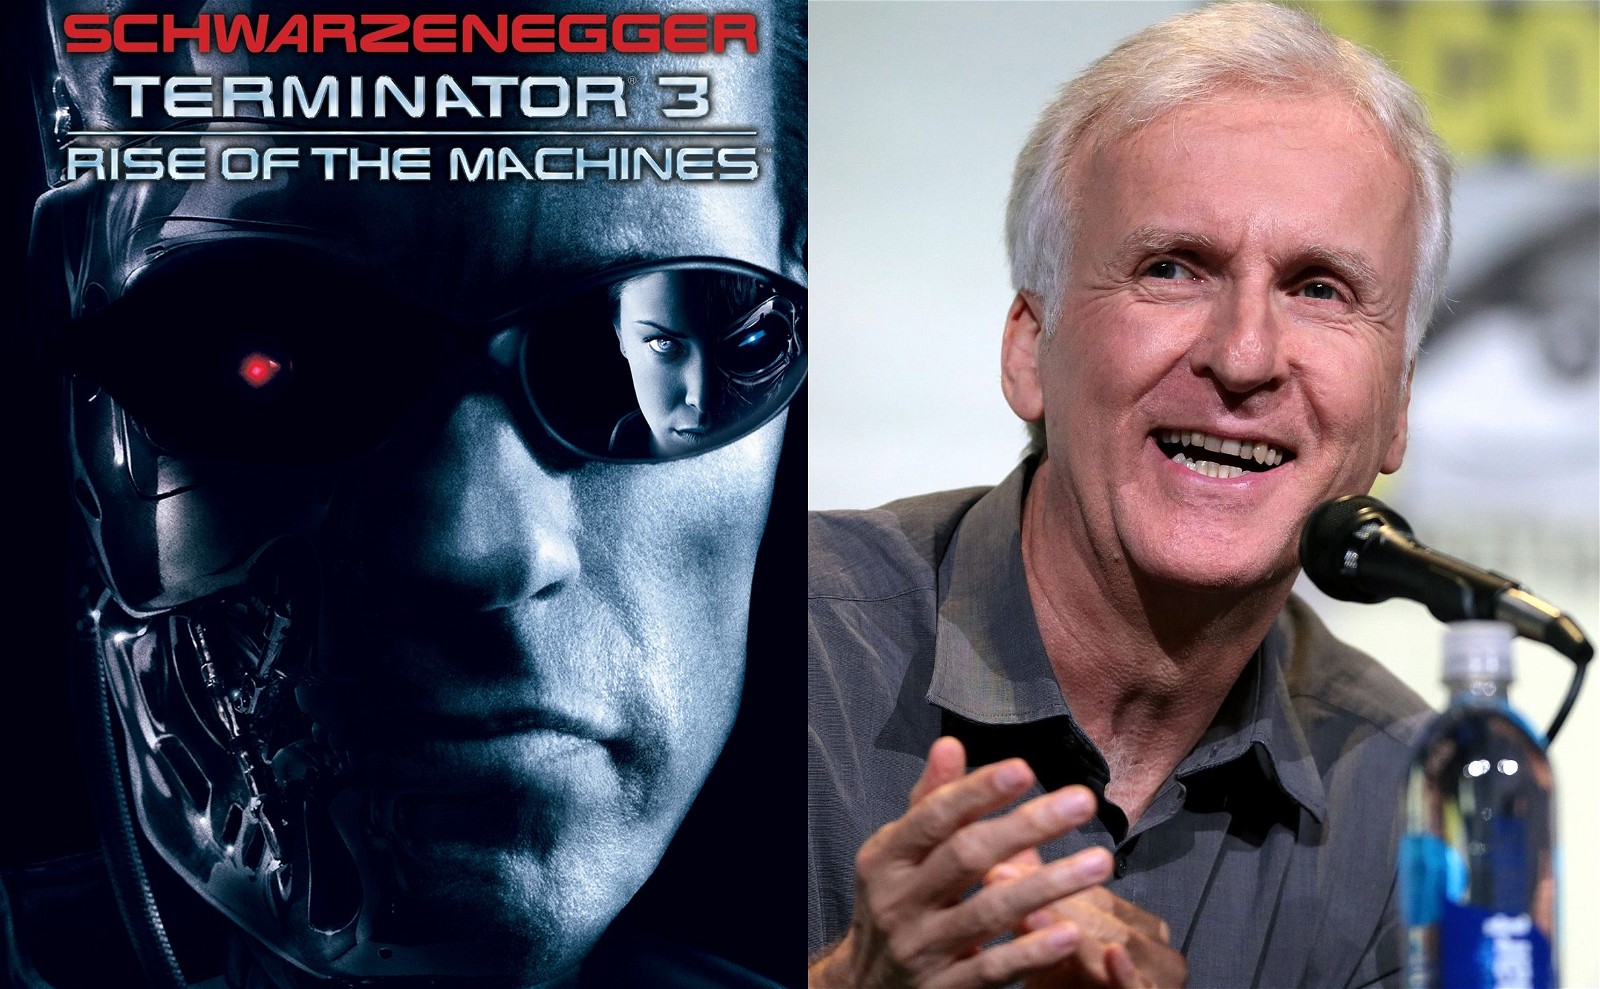 James Cameron wasn't involved in Terminator 3